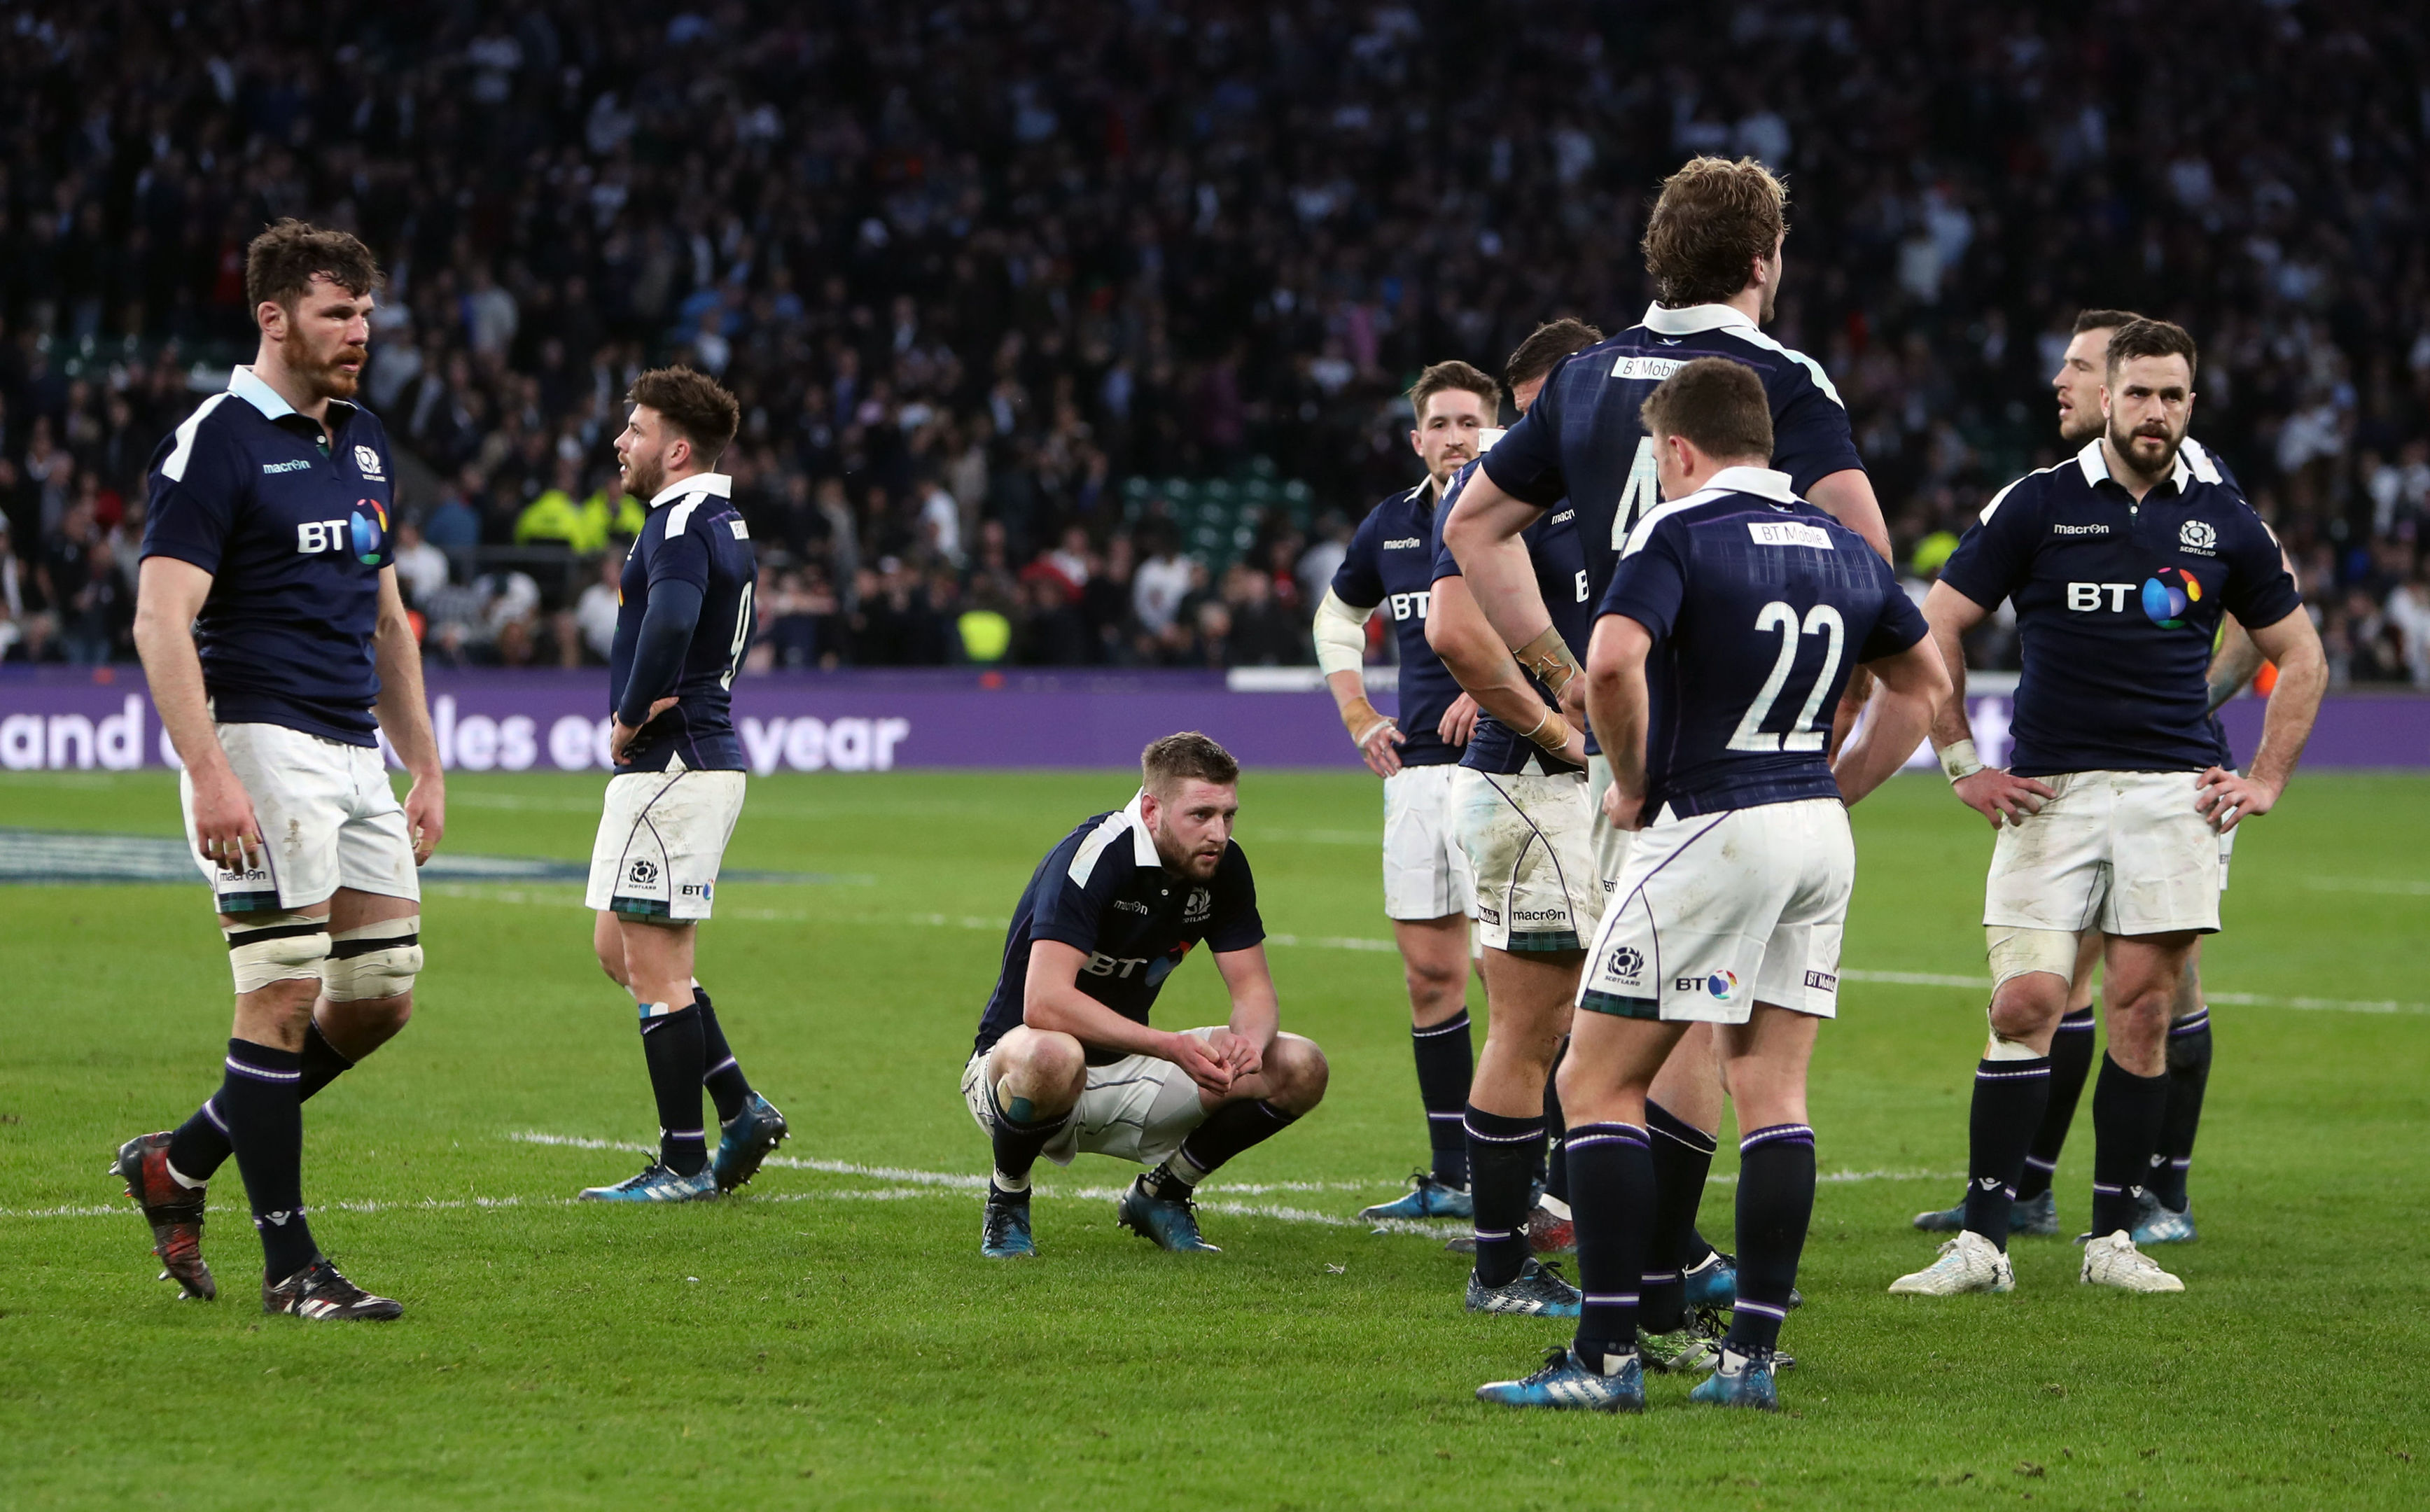 Dejected Scottish players at the end of Saturday's 61-21 defeat at Twickenham.